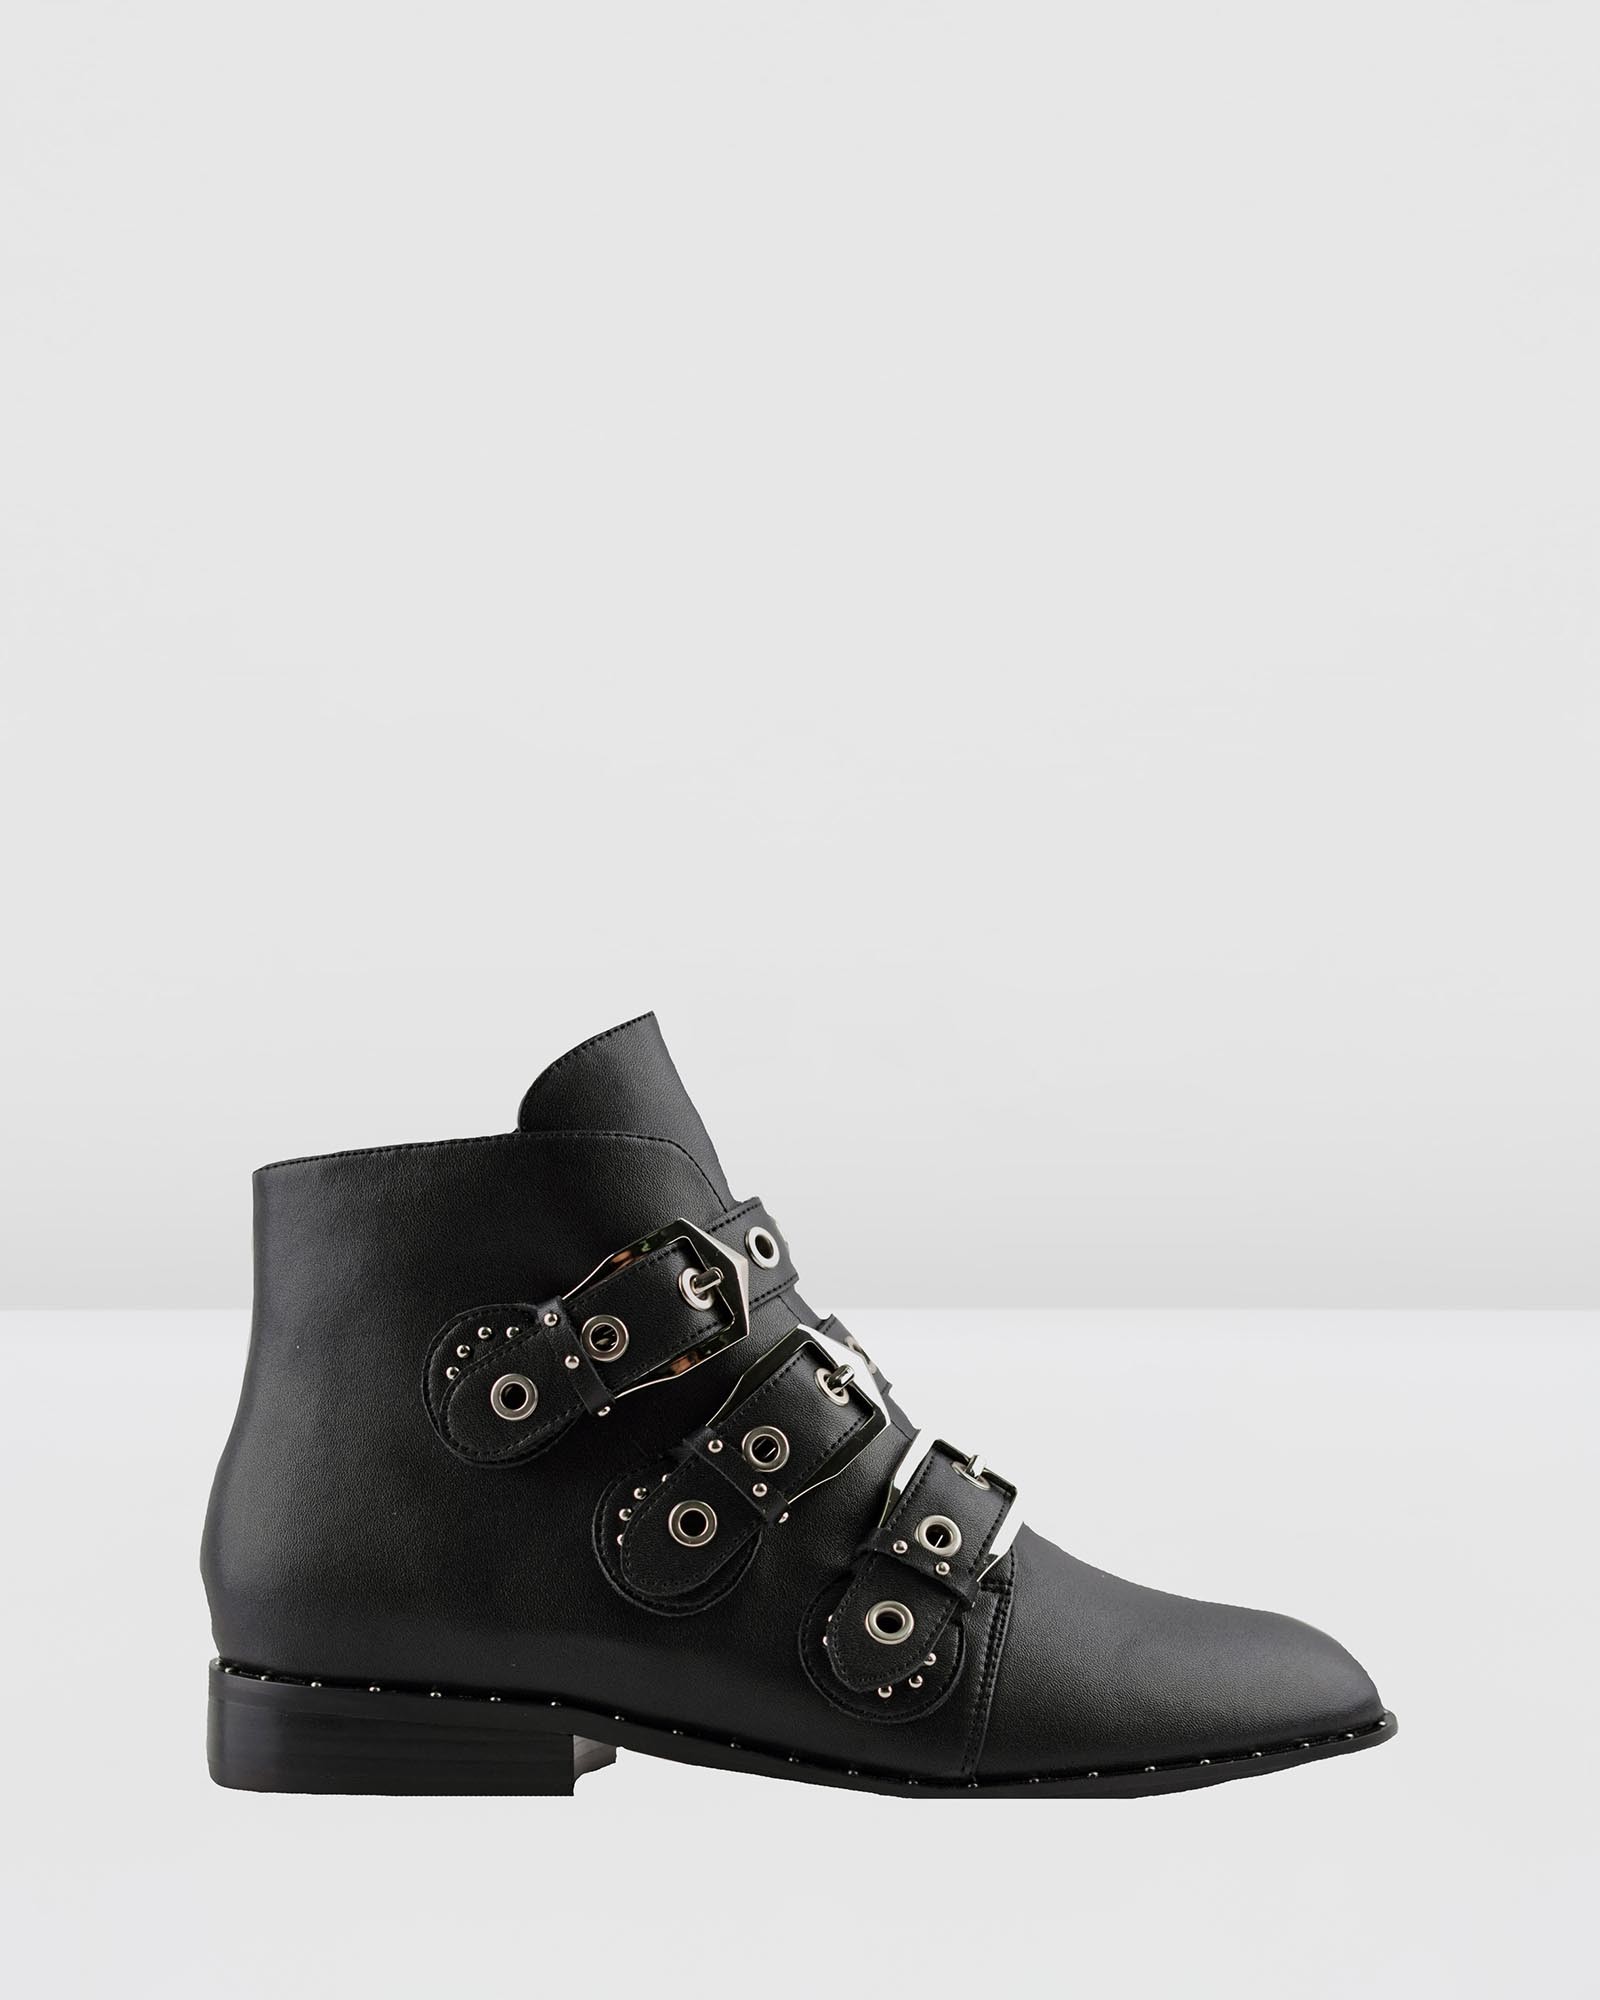 Maxwell Boots Black by Sol Sana | ShoeSales